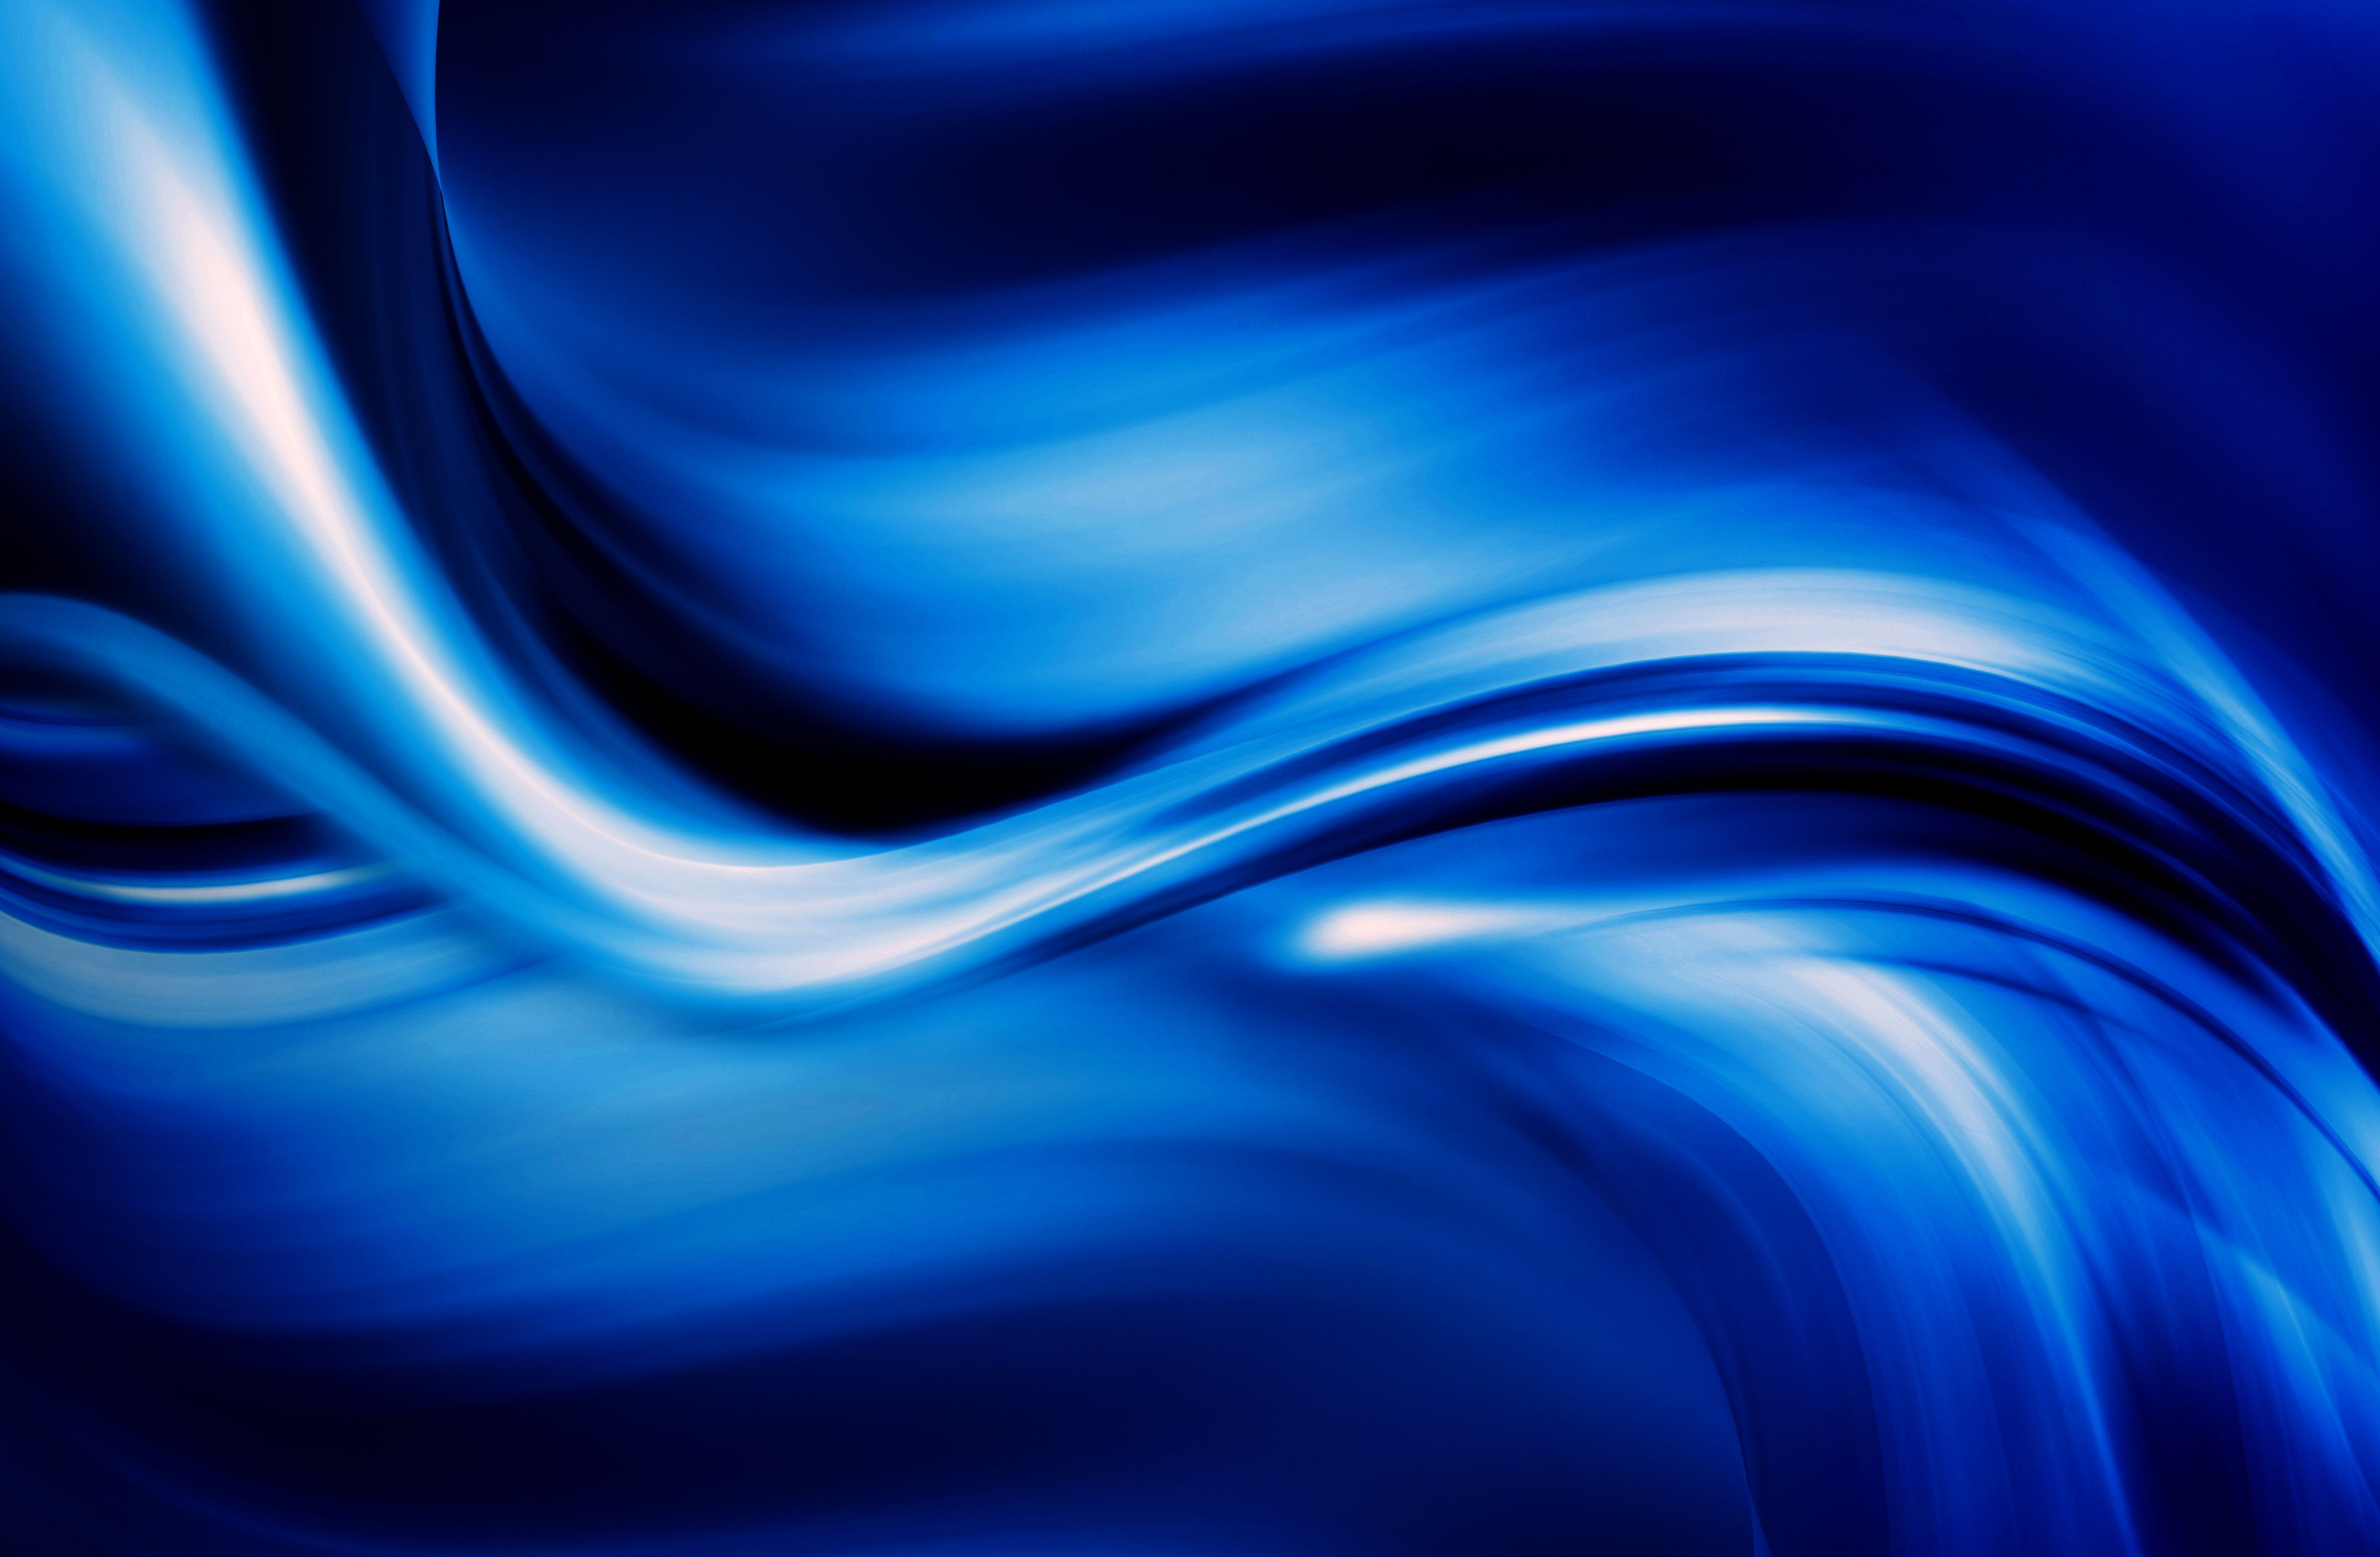 Another dark blue abstract background texture image www